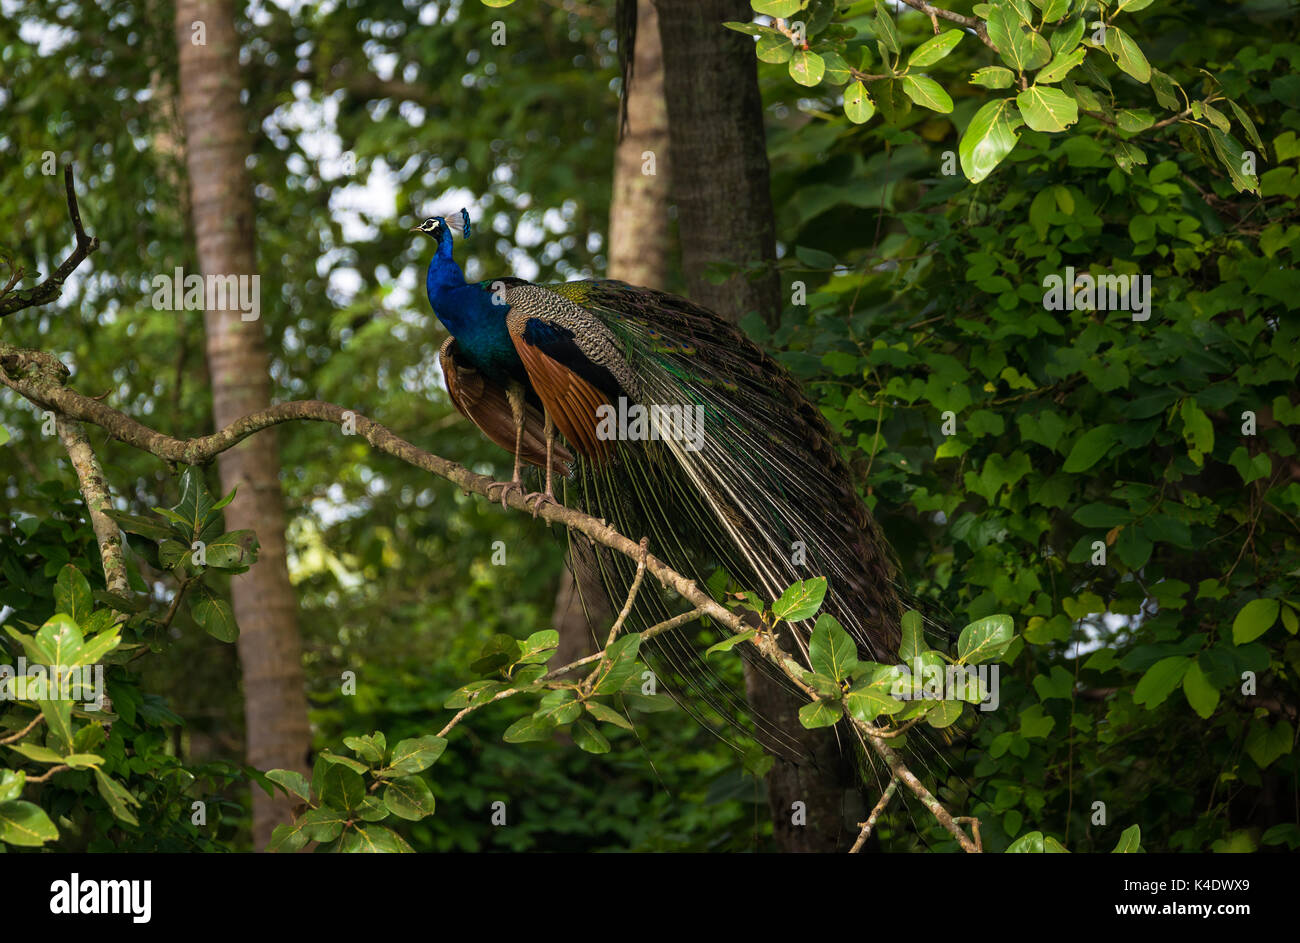 An Indian Peafowl Bird perched on a tree Stock Photo